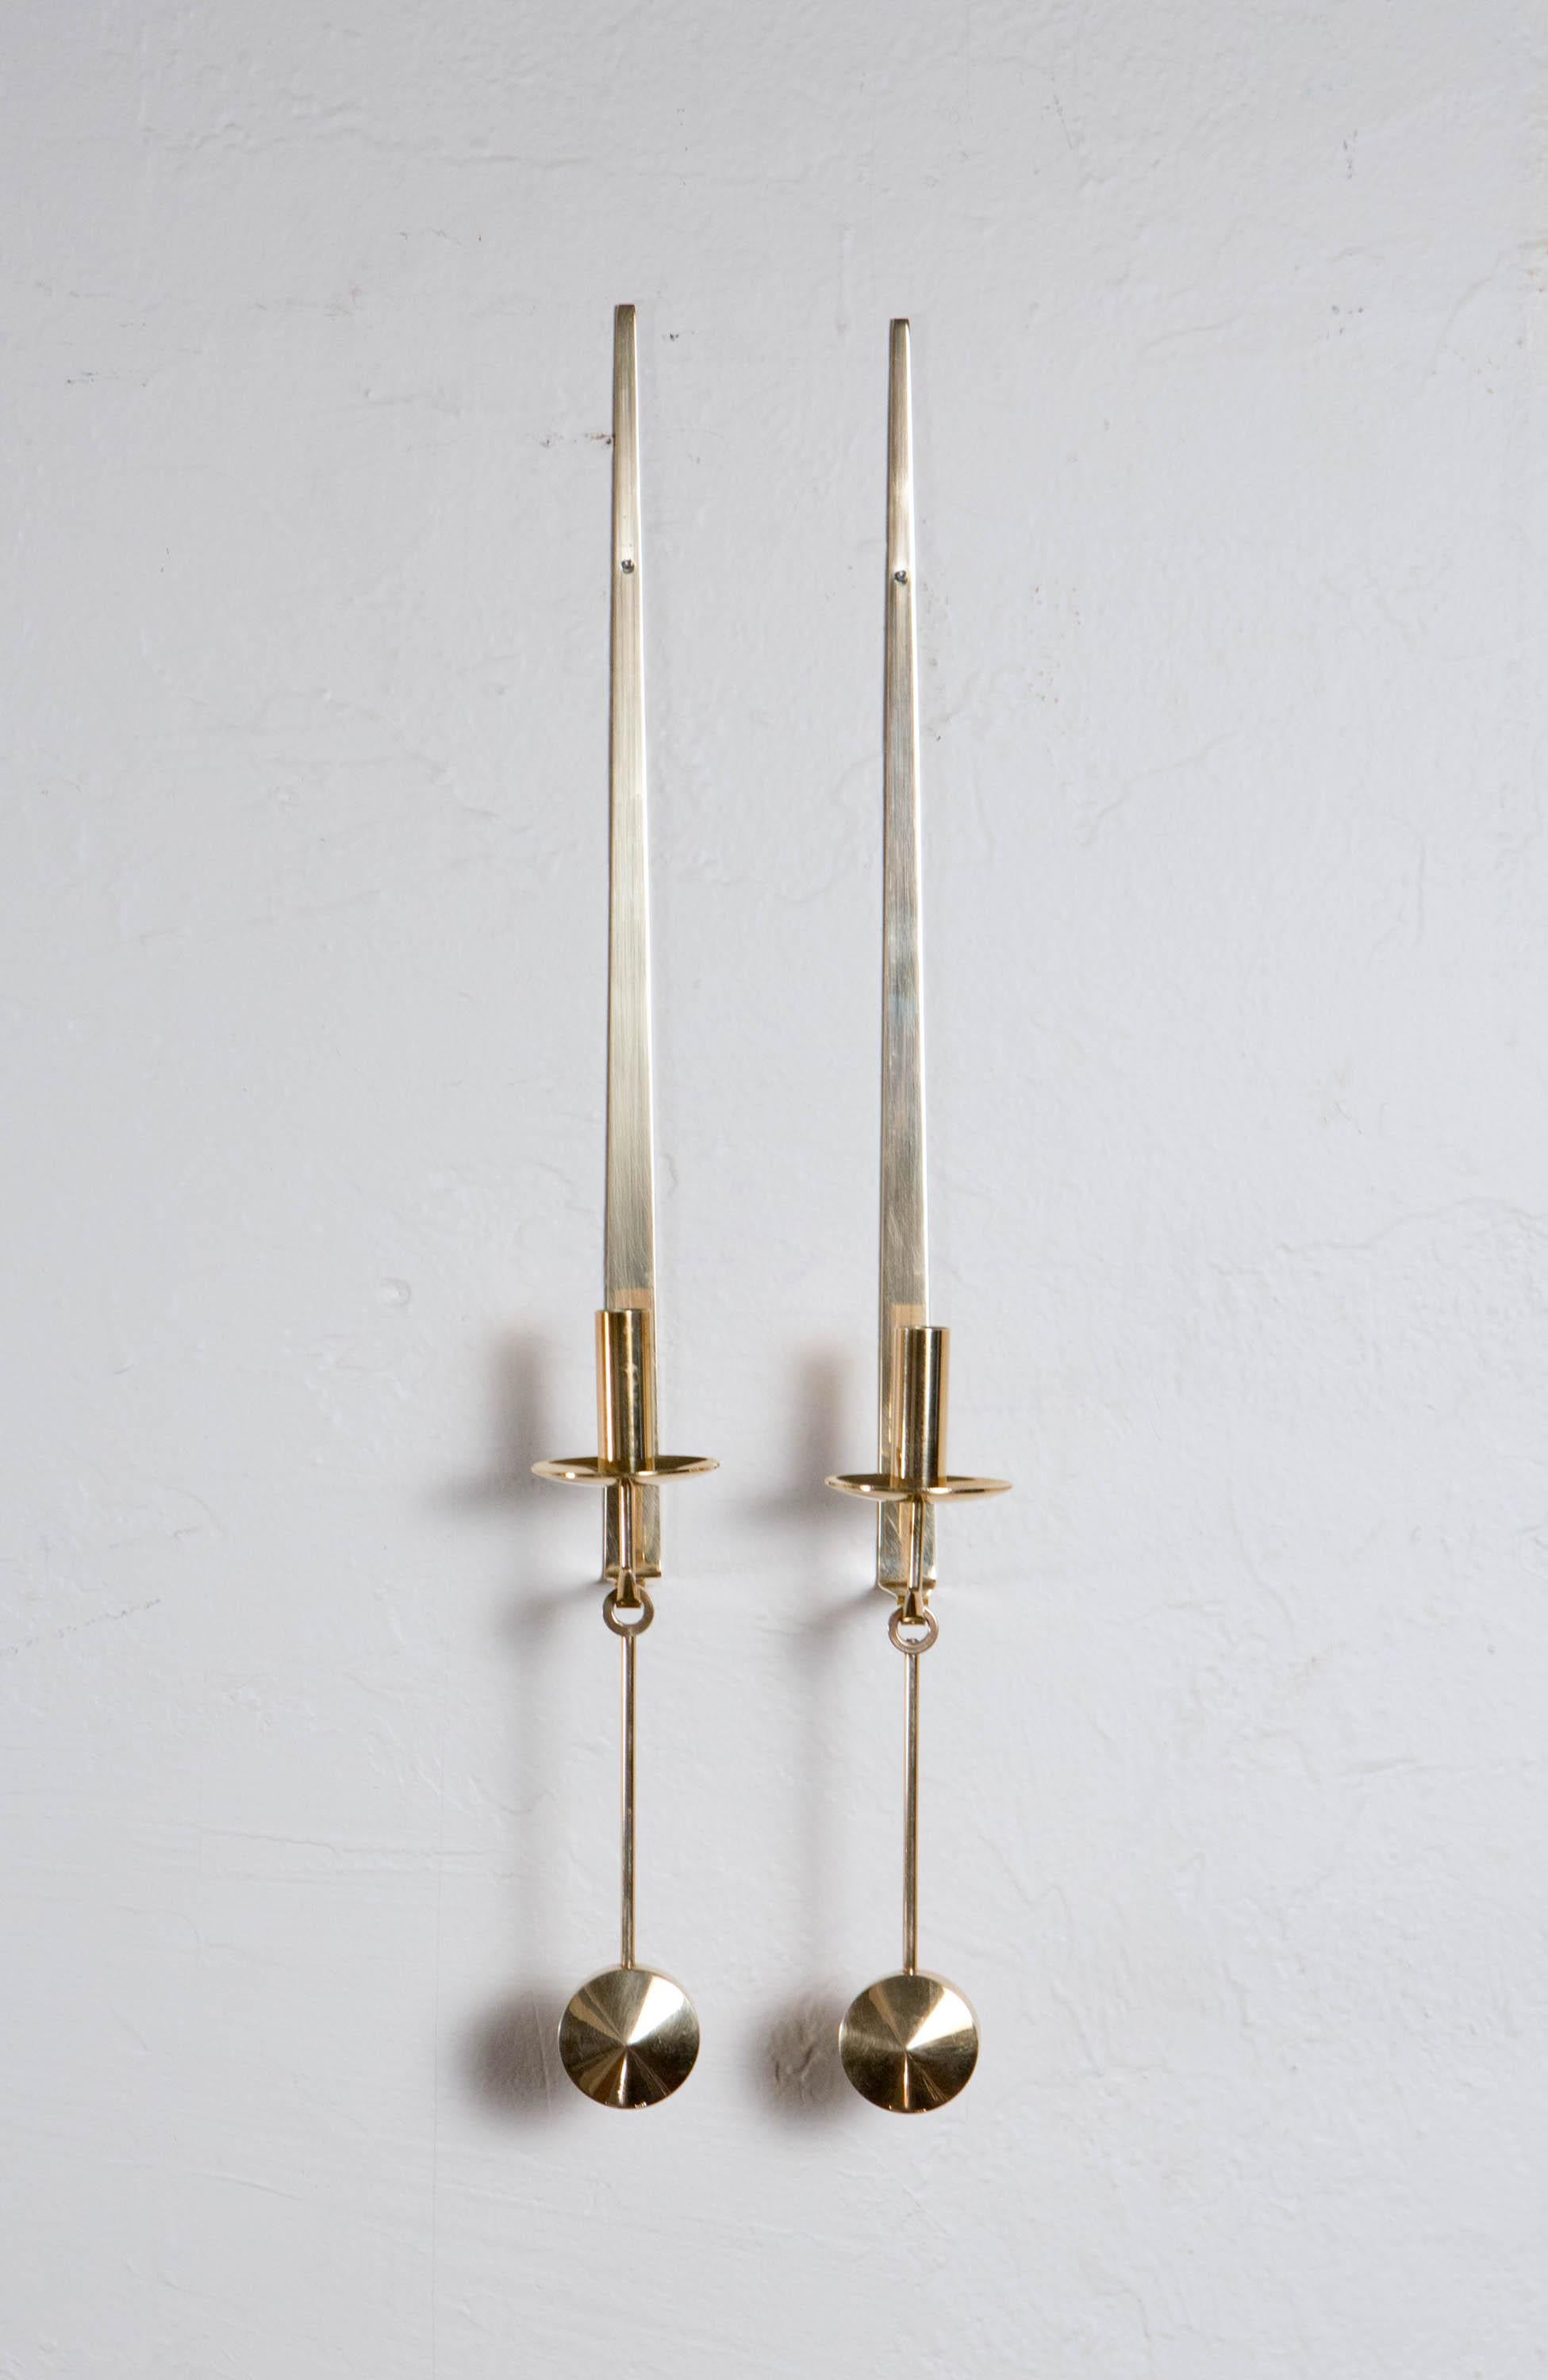 Pierre Forssell - Pair of Pendel Wall Candleholders for Skultuna, Sweden, 1960s

This is a pair of elegant Pierre Forsell designed brass Pendel wall sconce. This is the rarer version comes with th bobeche (wax catcher rim)

Made by Skultuna,